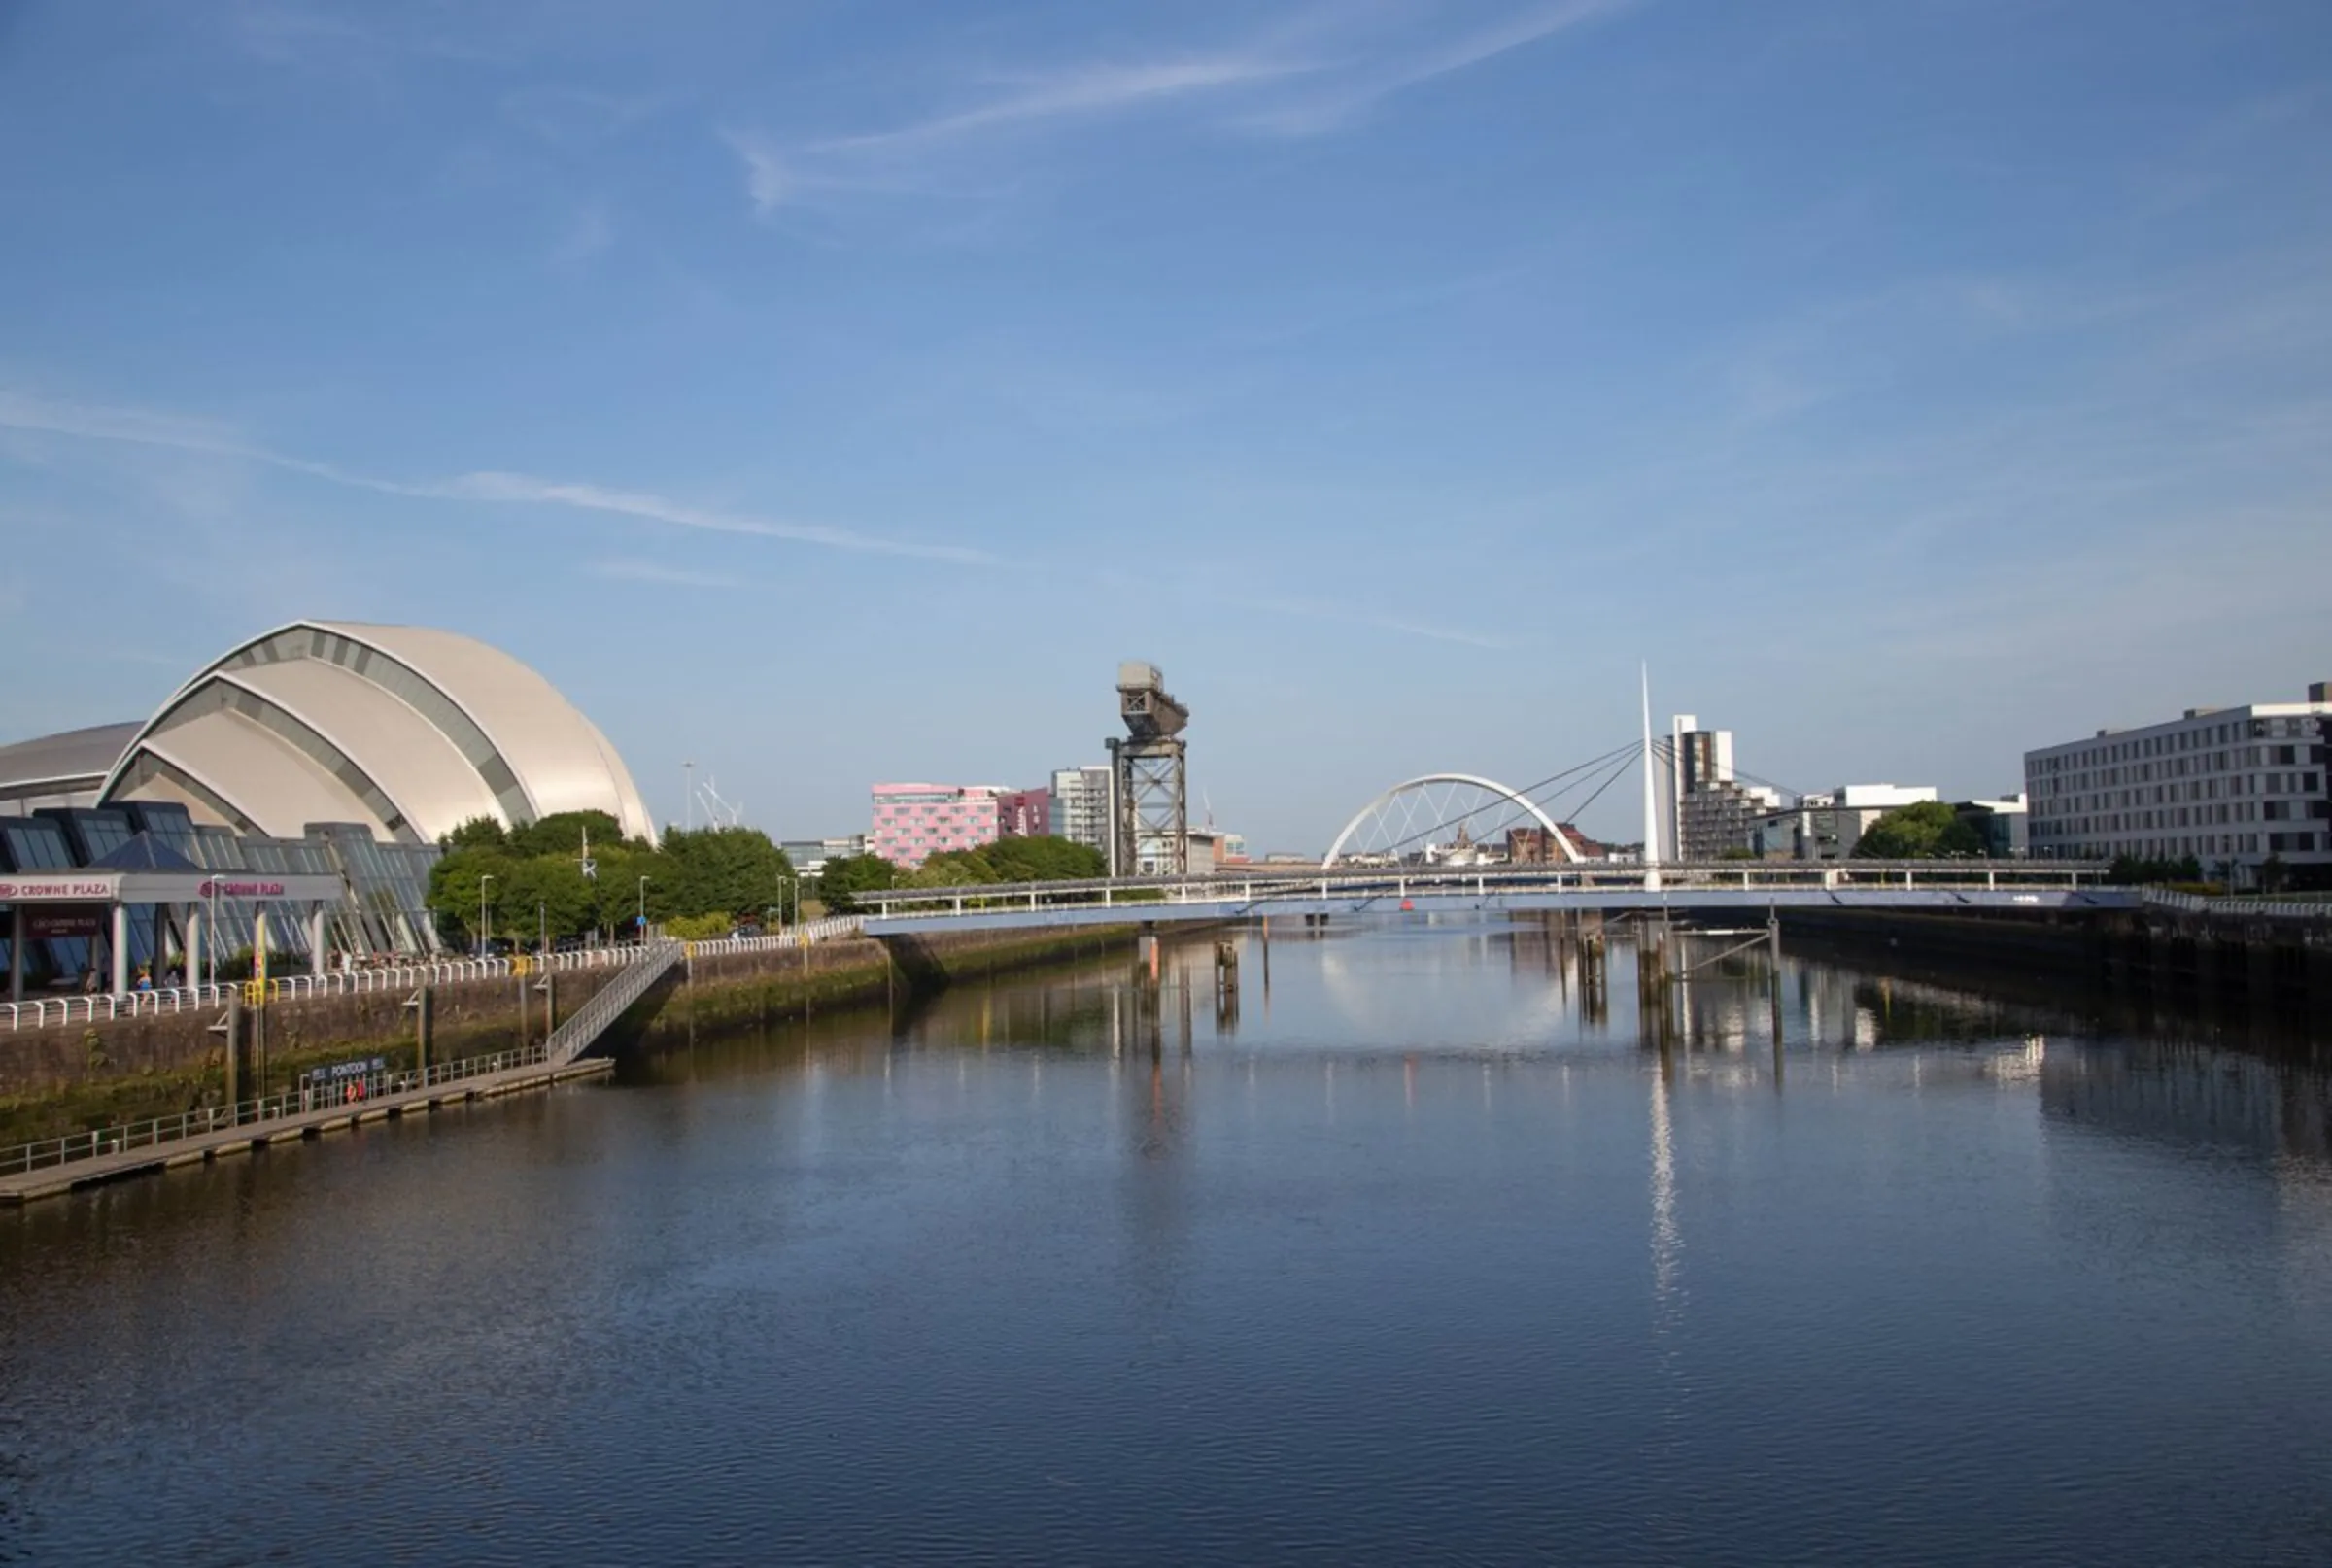 The SEC Armadillo conference centre, which will host the COP26 climate conference this year, sits on the banks of the River Clyde in Glasgow, United Kingdom, July 22, 2021